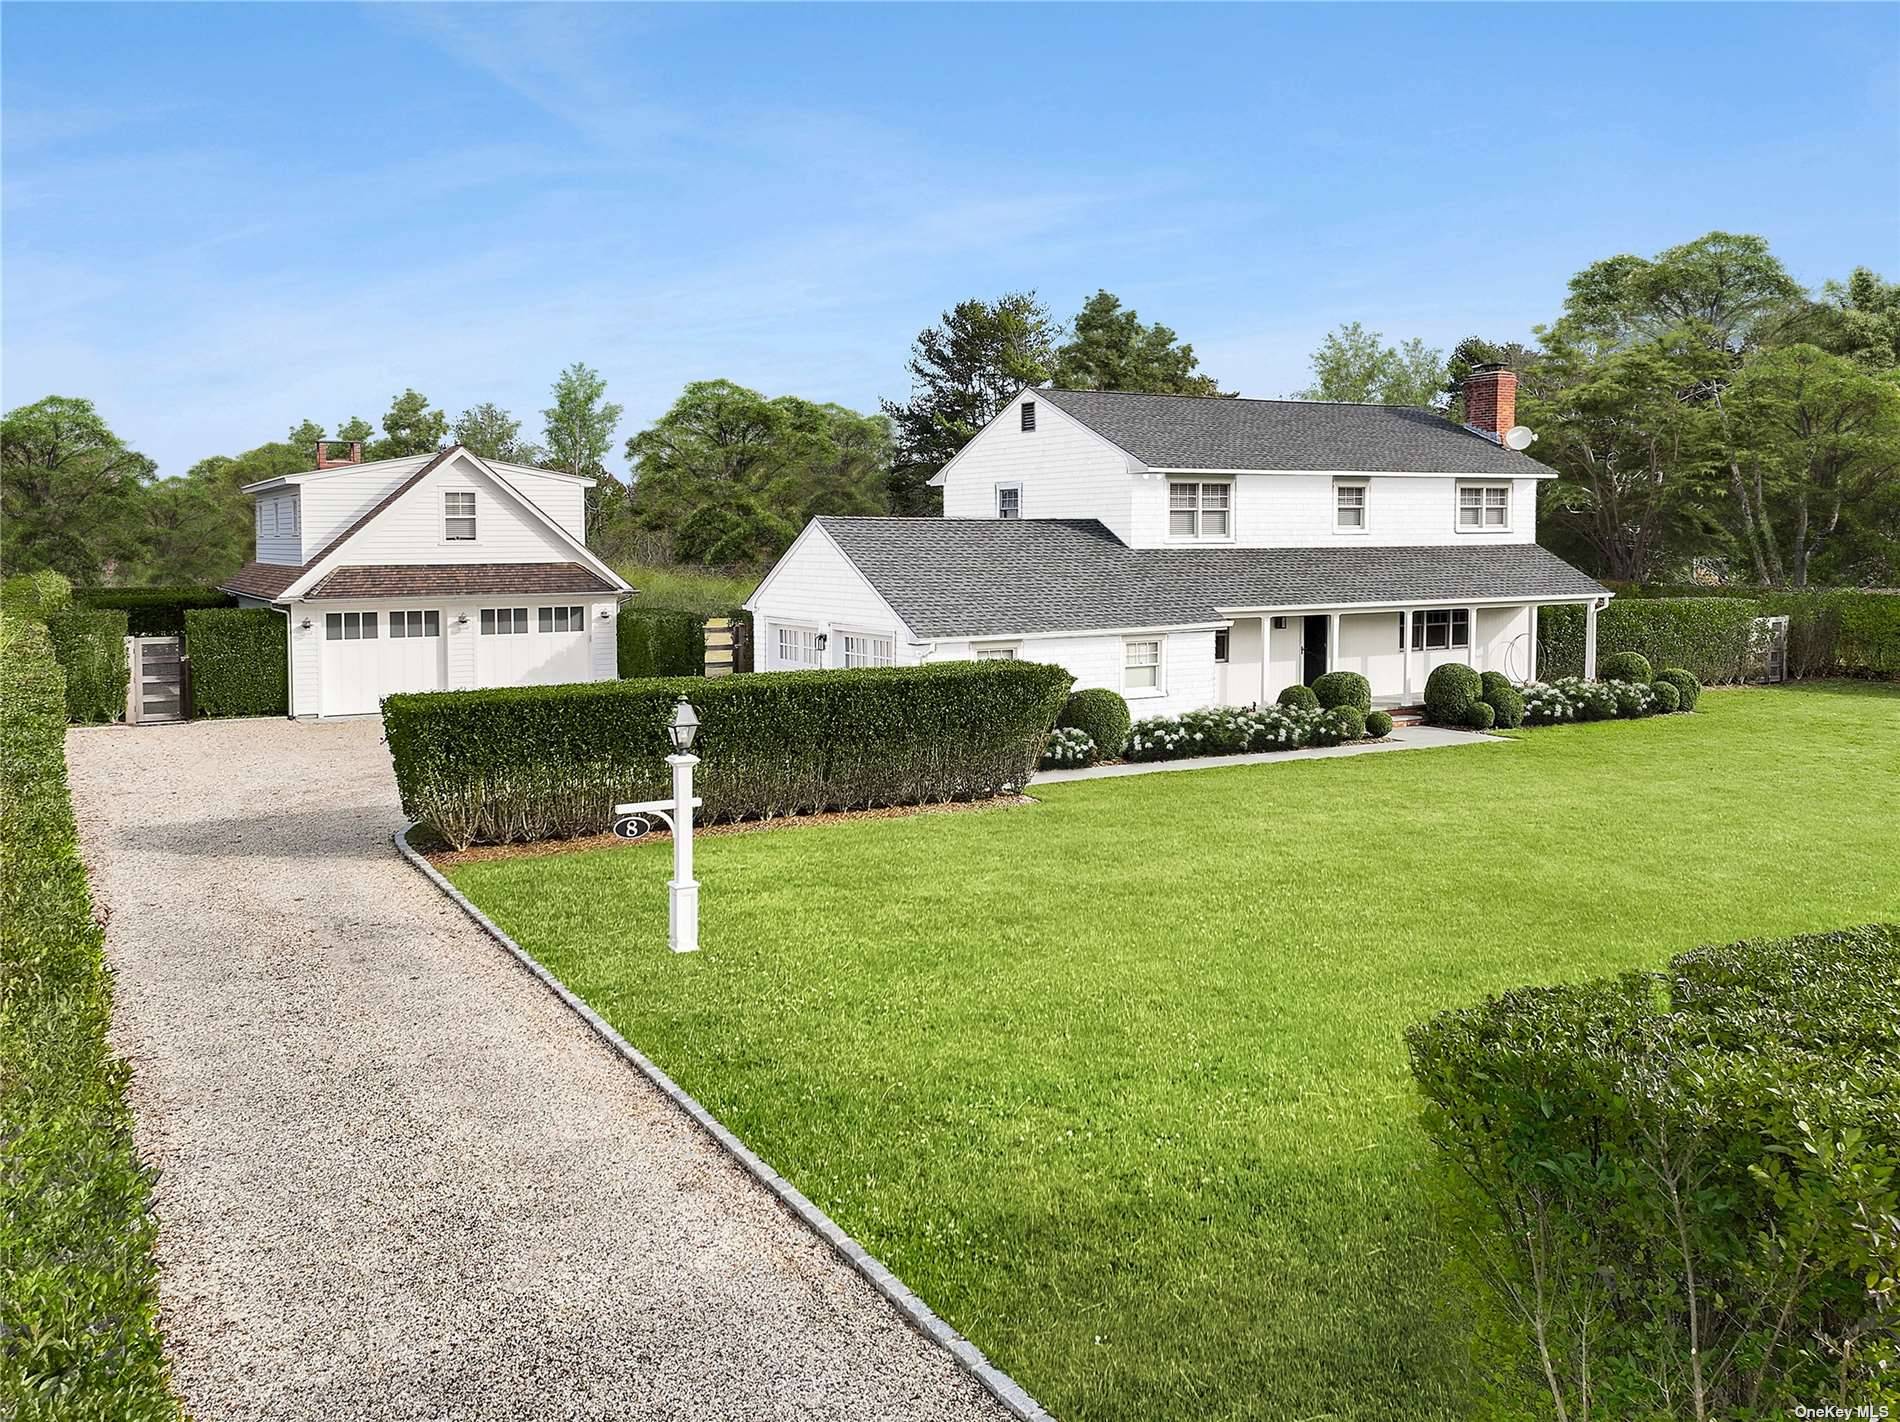 Located down a quiet cul de sac lane in the bucolic hamlet of Remsenburg, this classic Hamptons Farmhouse stands tall on a privately hedged acre, fully fenced and beautifully landscaped.